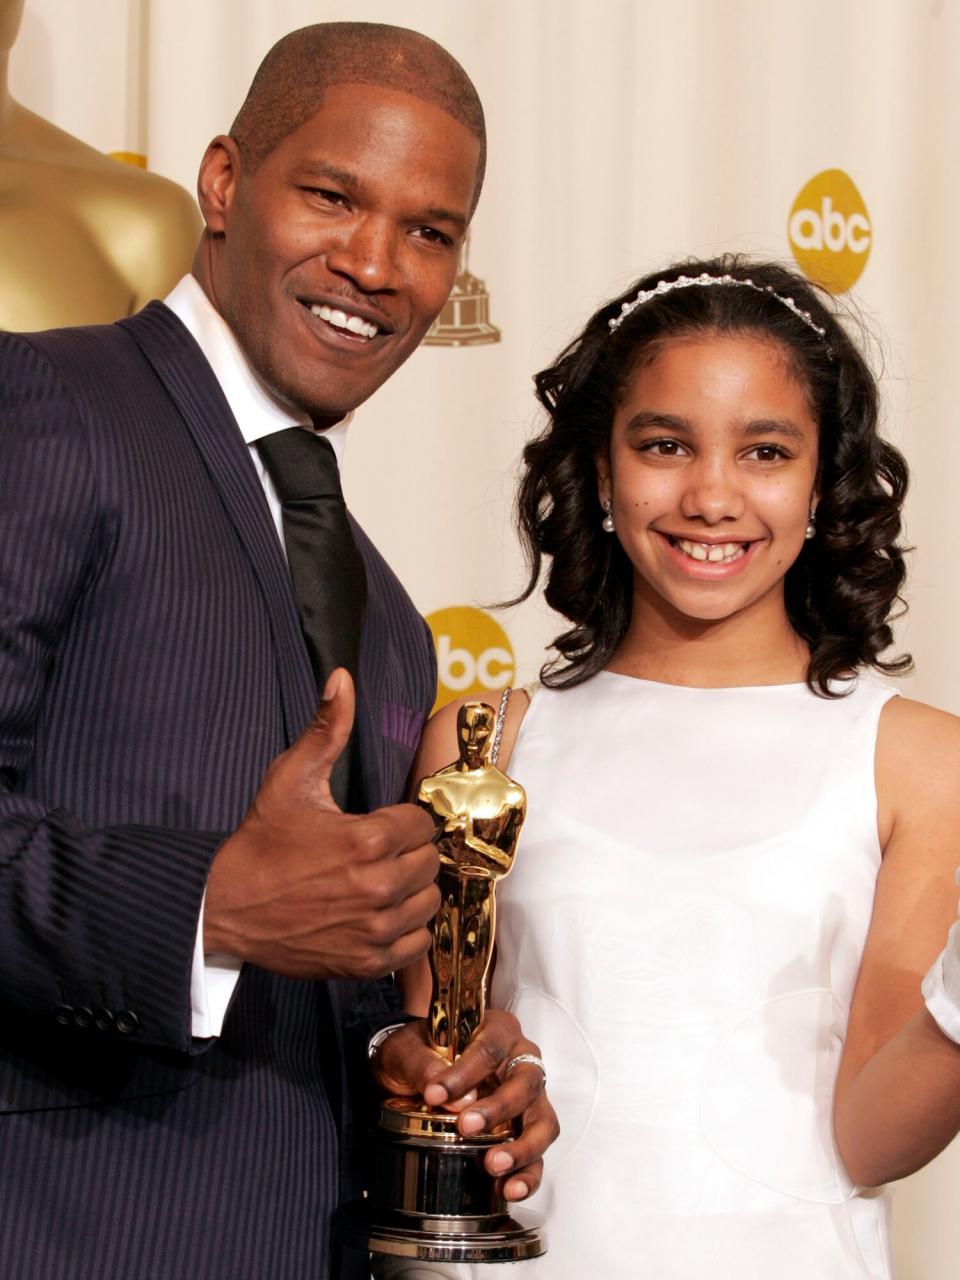 Jamie Foxx, winner Best Actor in a Leading Role for "Ray," and daughter Corrine Foxx at the Kodak Theatre in Hollywood, California